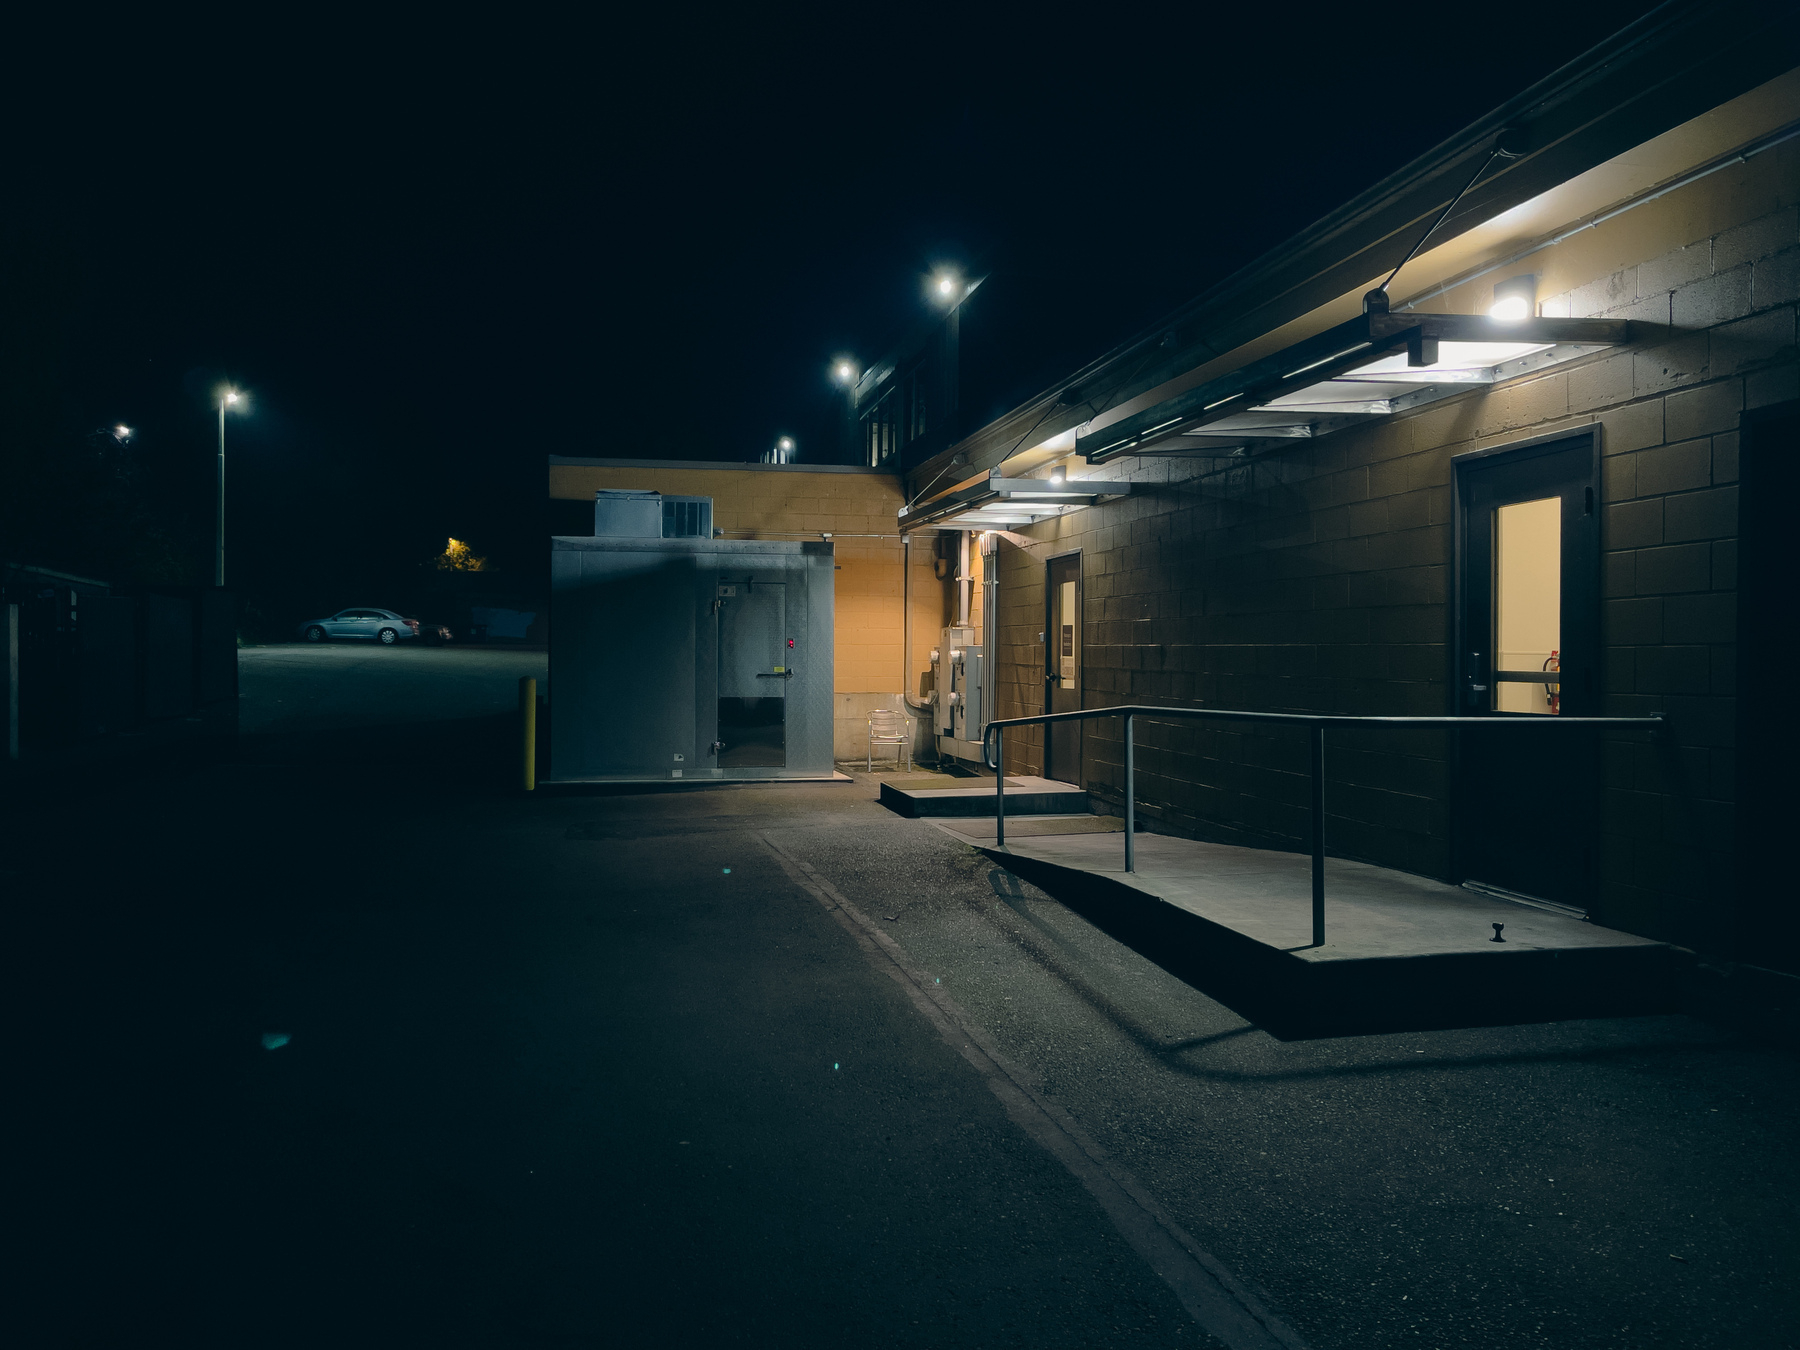 Alley behind commercial buildings lit by security lights.